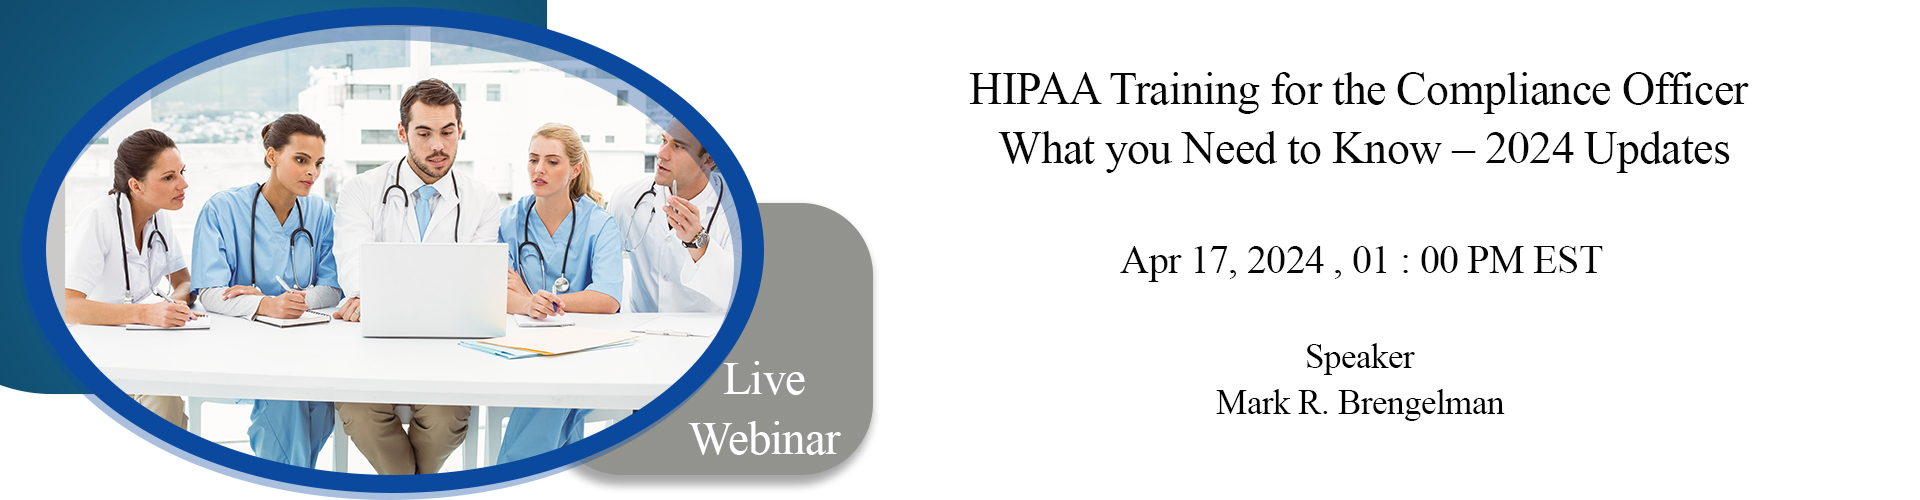 https://conferencepanel.com/conference/hipaa-training-for-the-compliance-officer-2024-updates